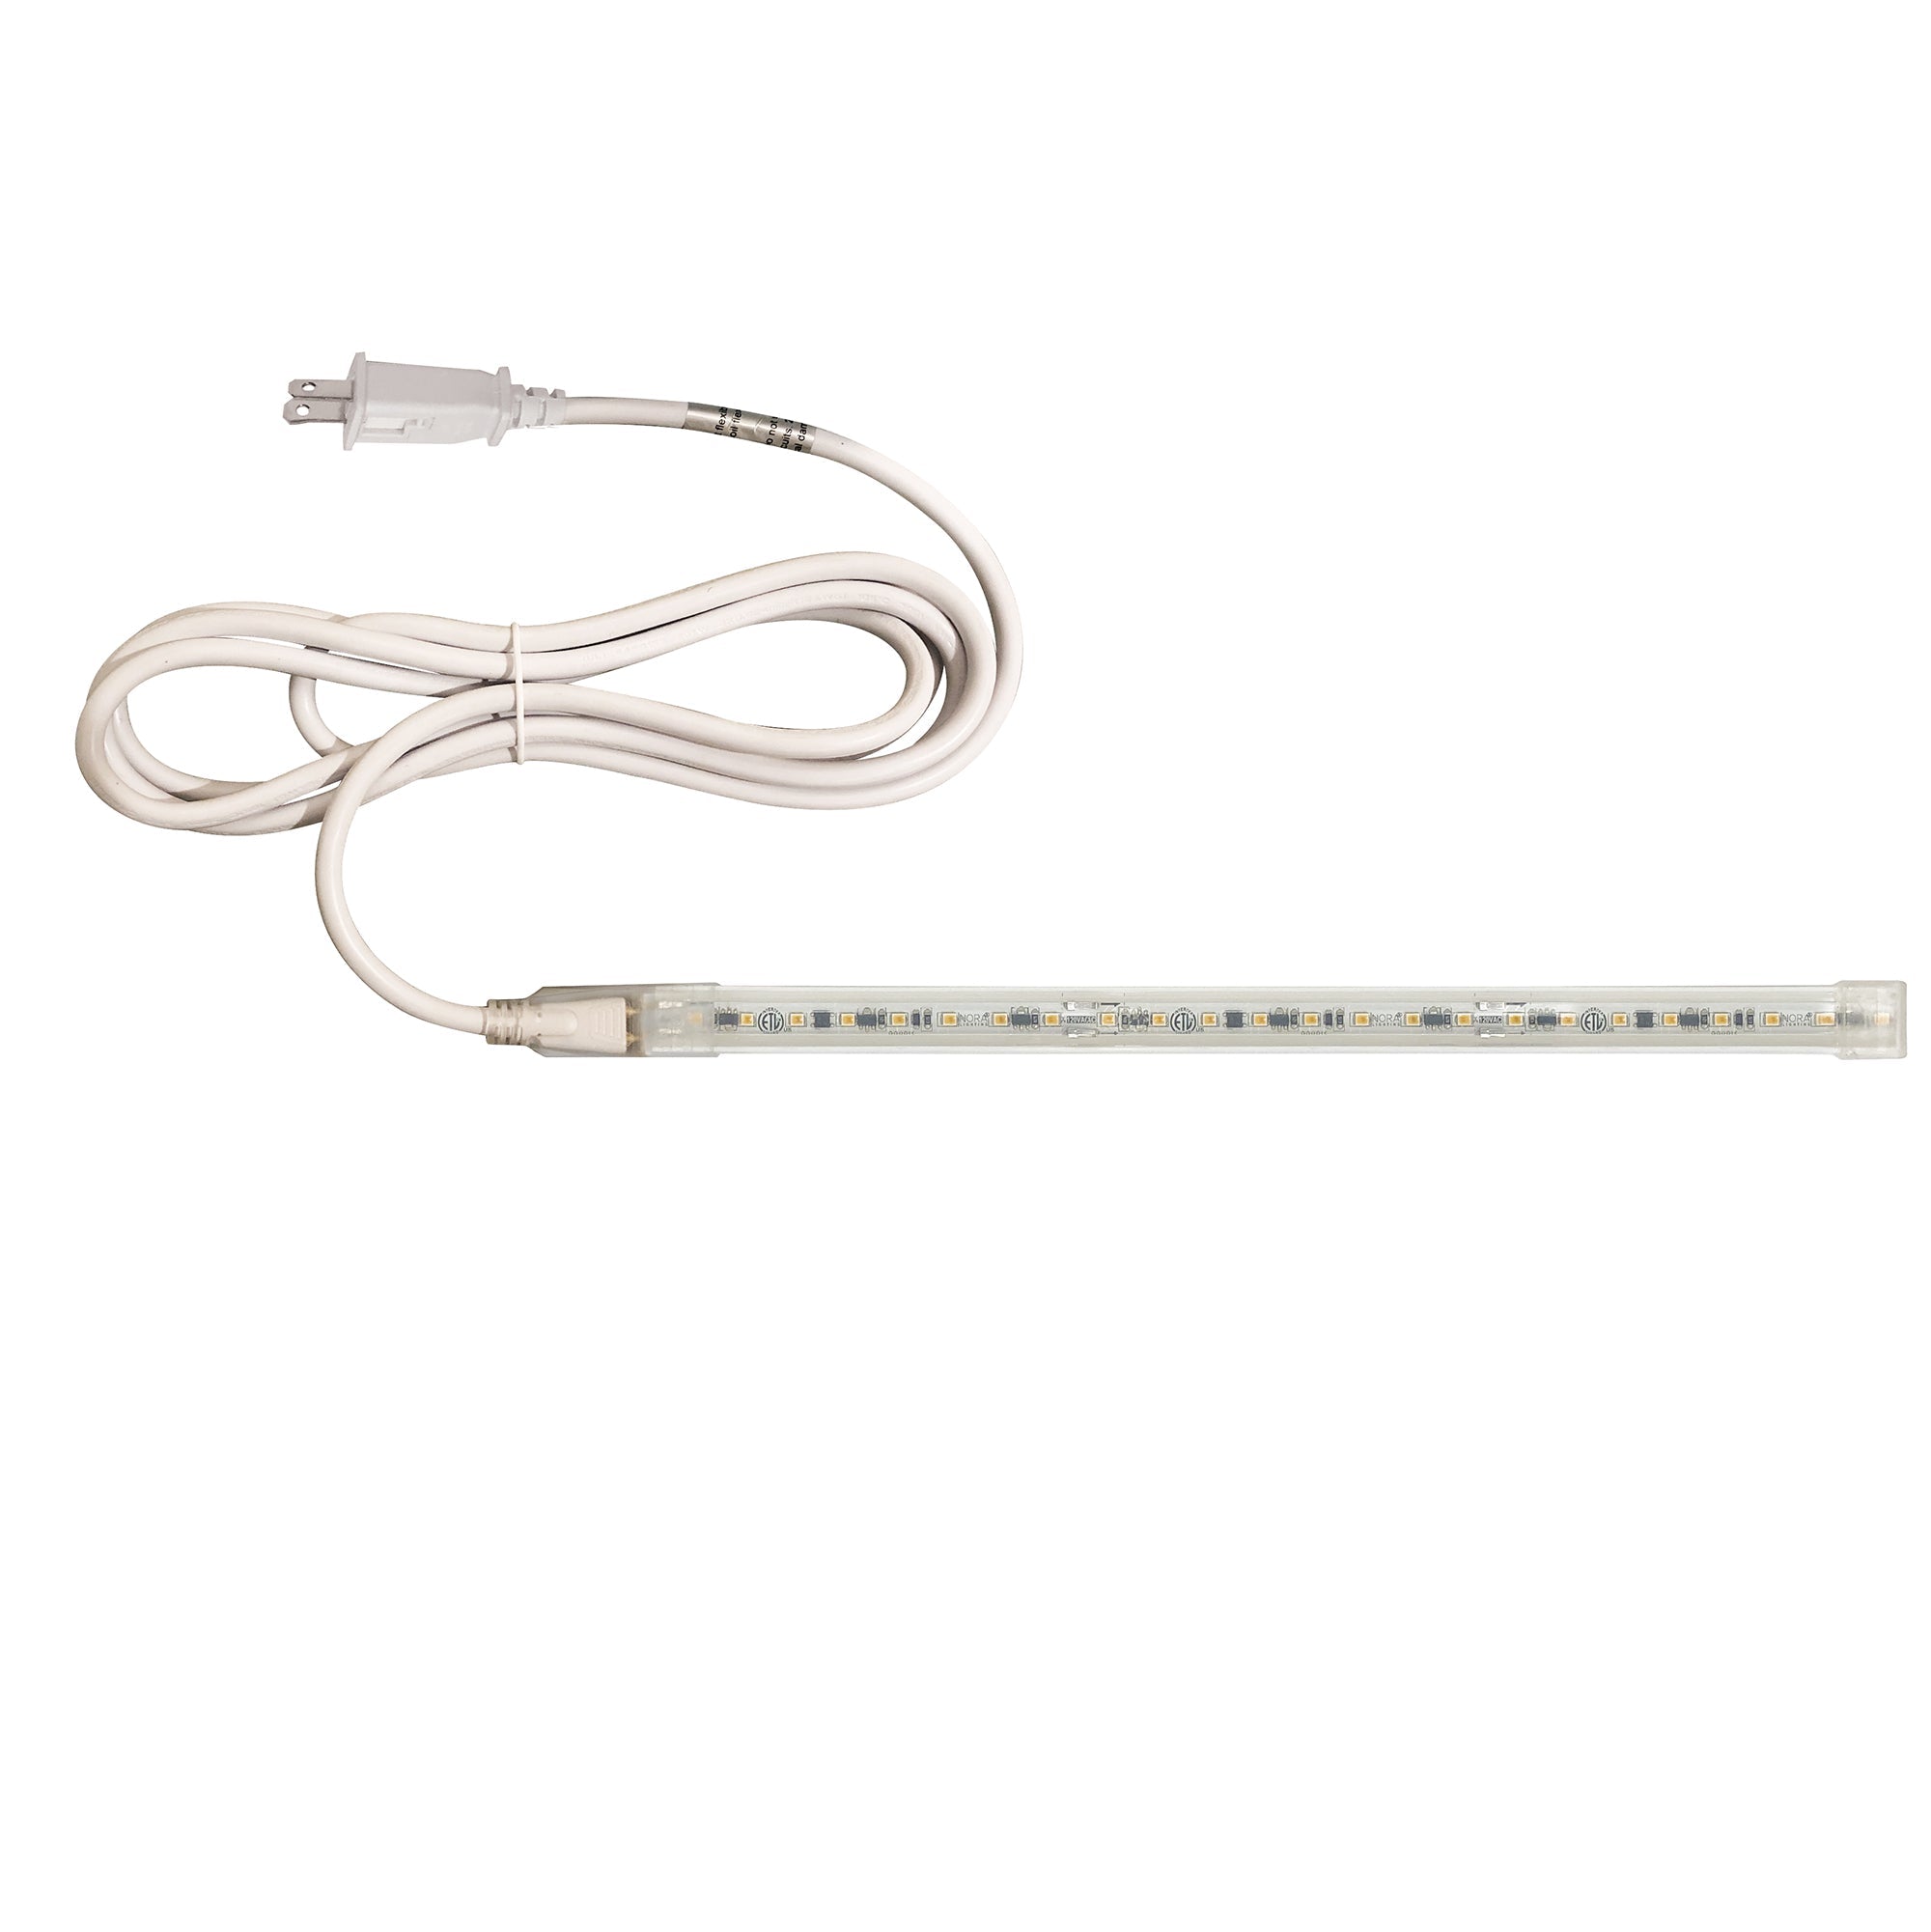 Nora Lighting NUTP13-W56-12-930/CP - Accent / Undercabinet - Custom Cut 56-ft 120V Continuous LED Tape Light, 330lm / 3.6W per foot, 3000K, w/ Mounting Clips and 8' Cord & Plug